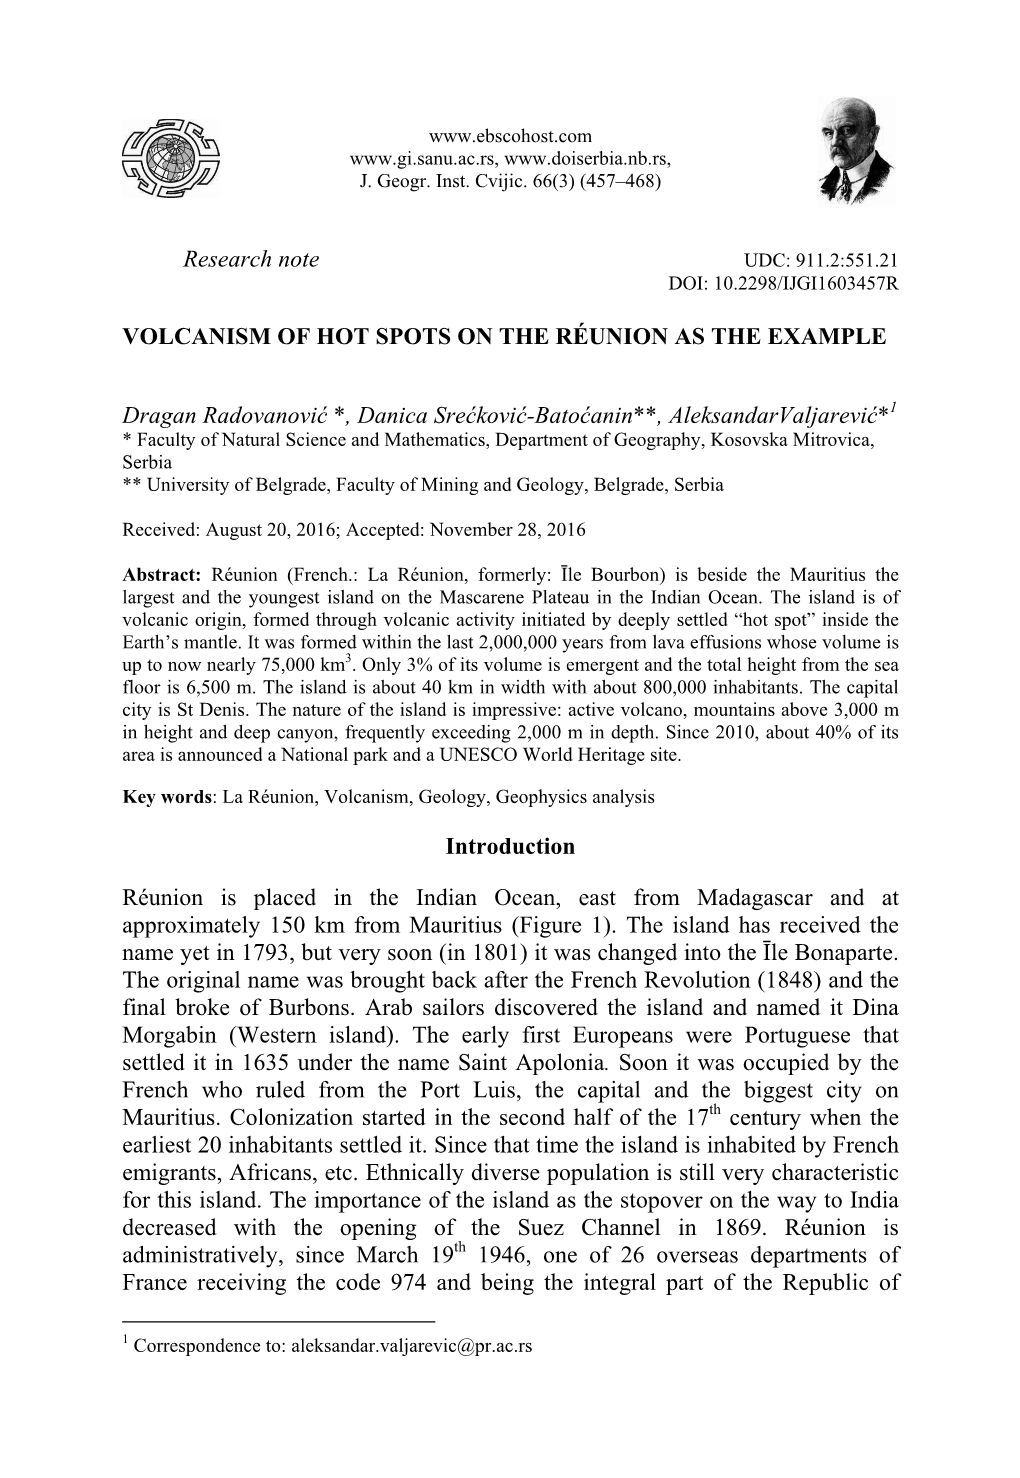 Research Note VOLCANISM of HOT SPOTS on the RÉUNION AS THE